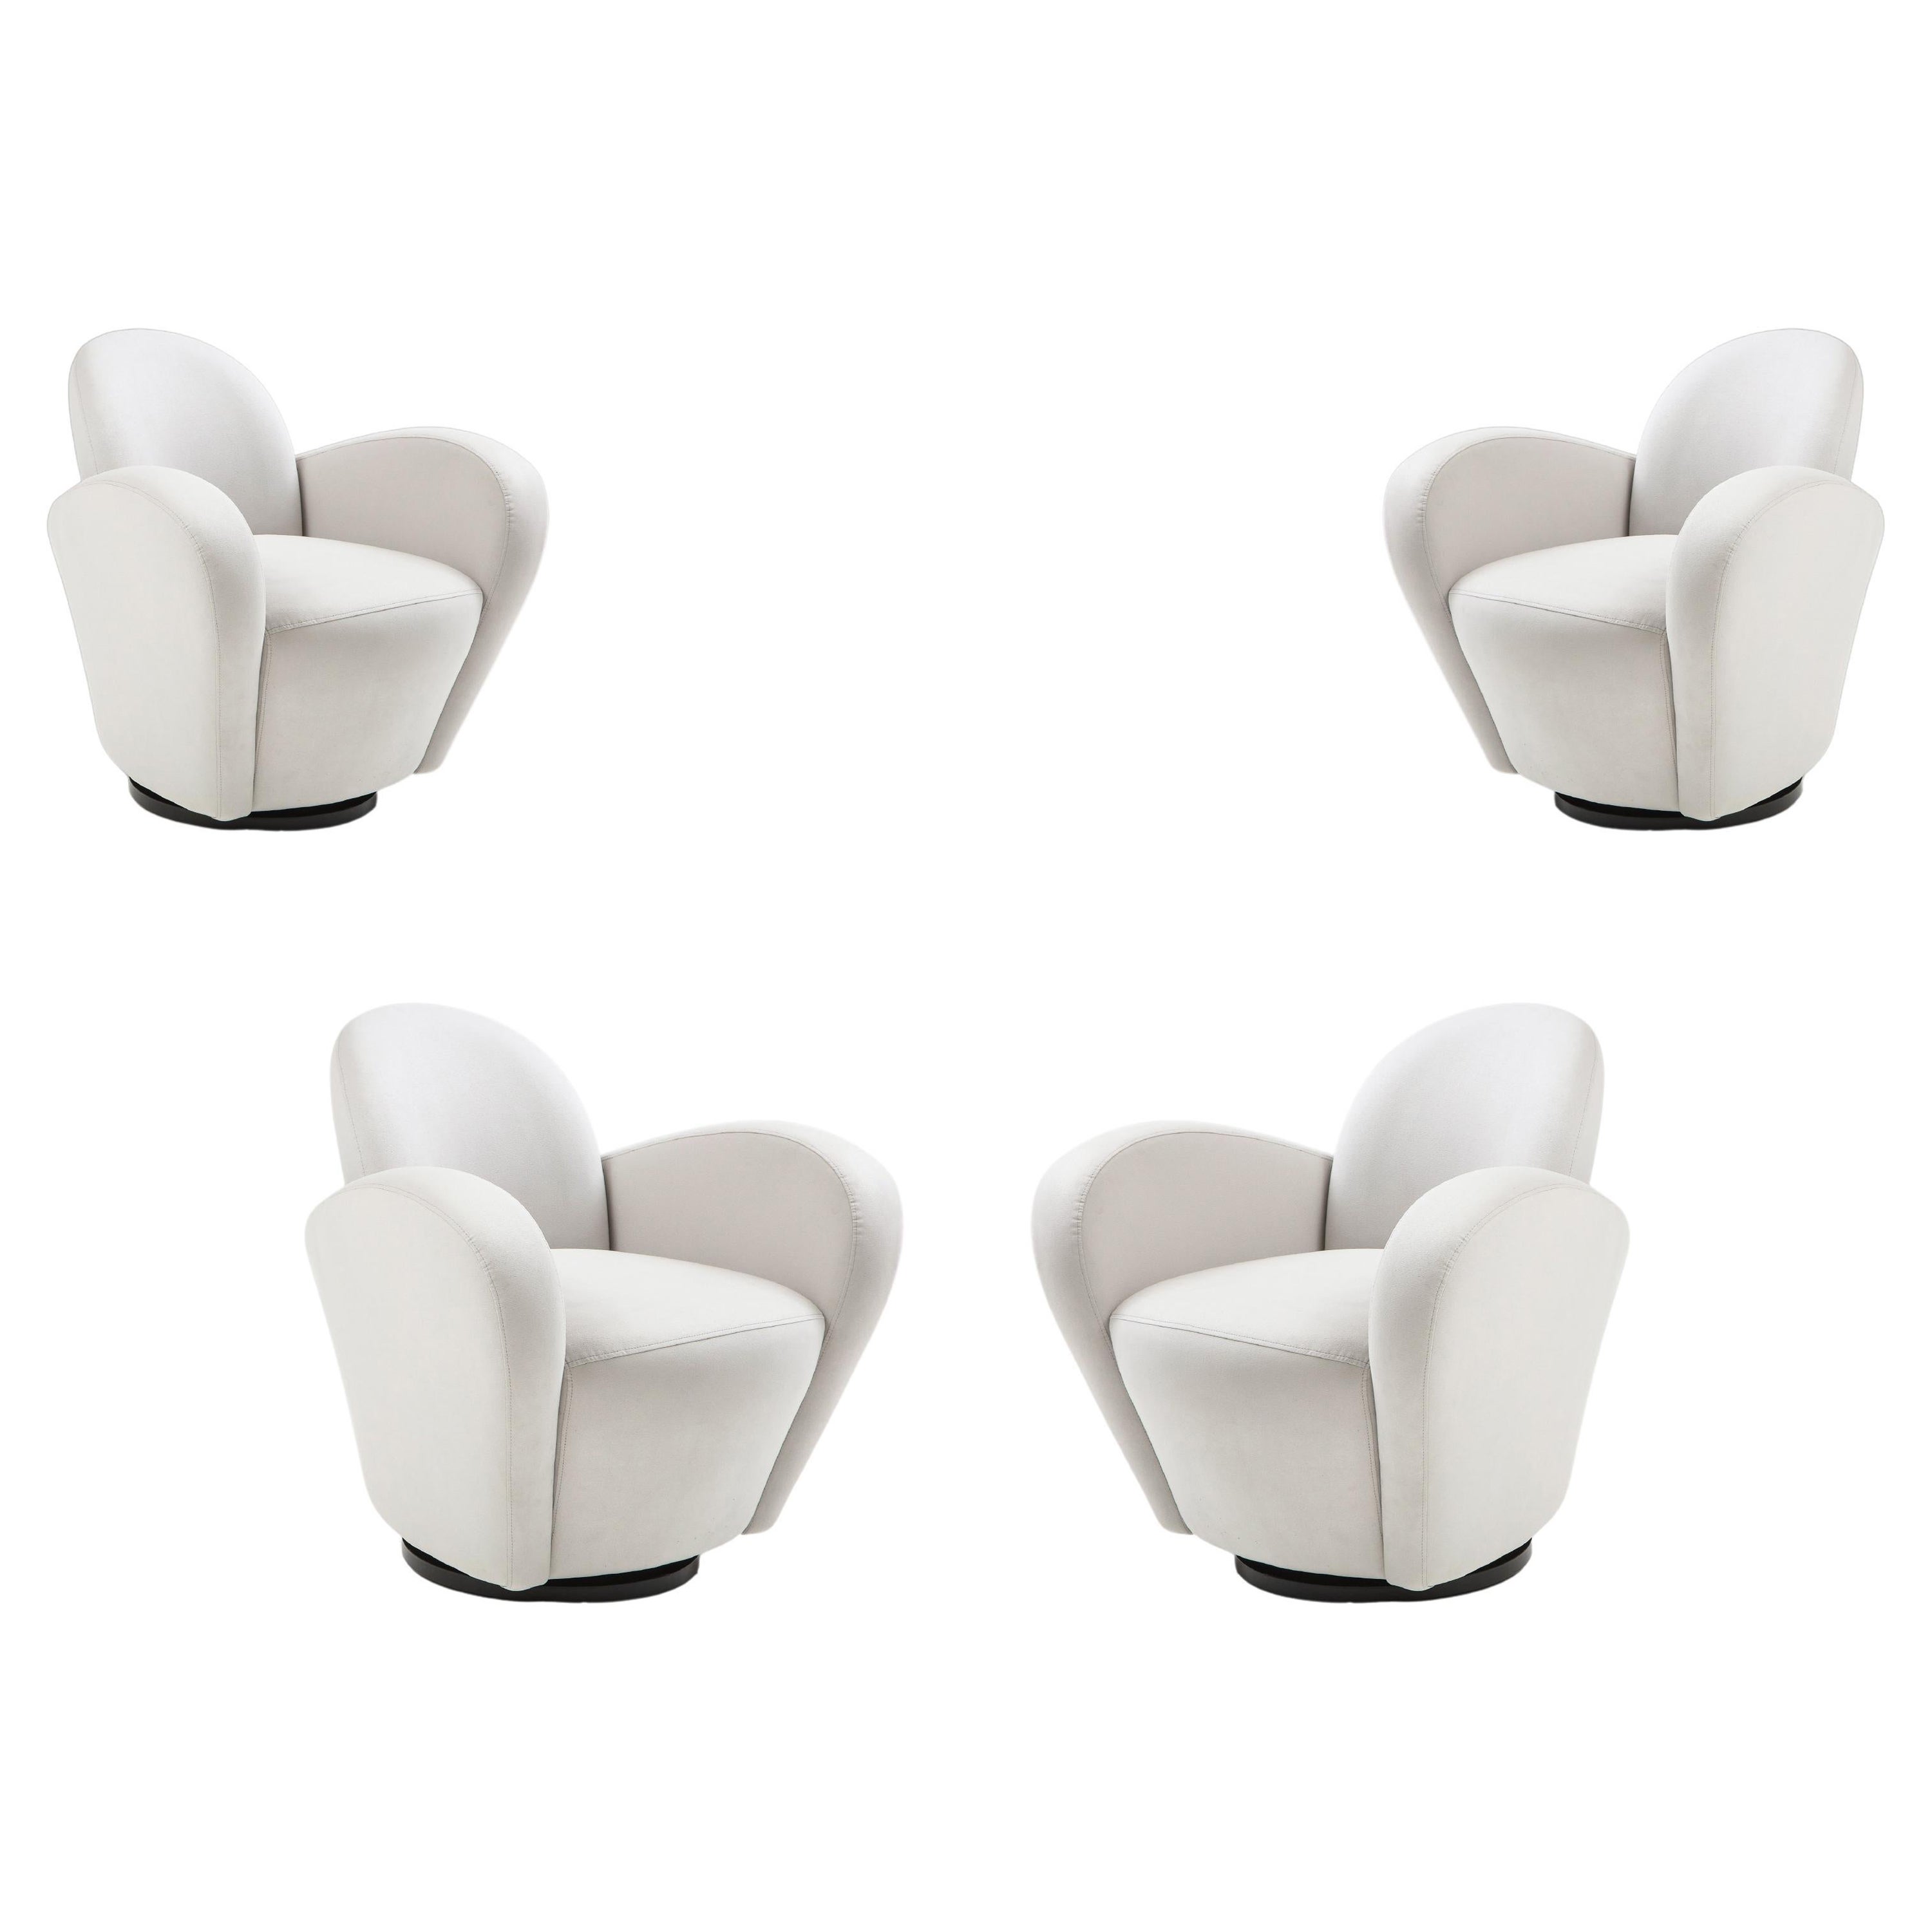 Michael Wolk for Directional 1970s Pairs of Swivel Lounge Chairs, COM 